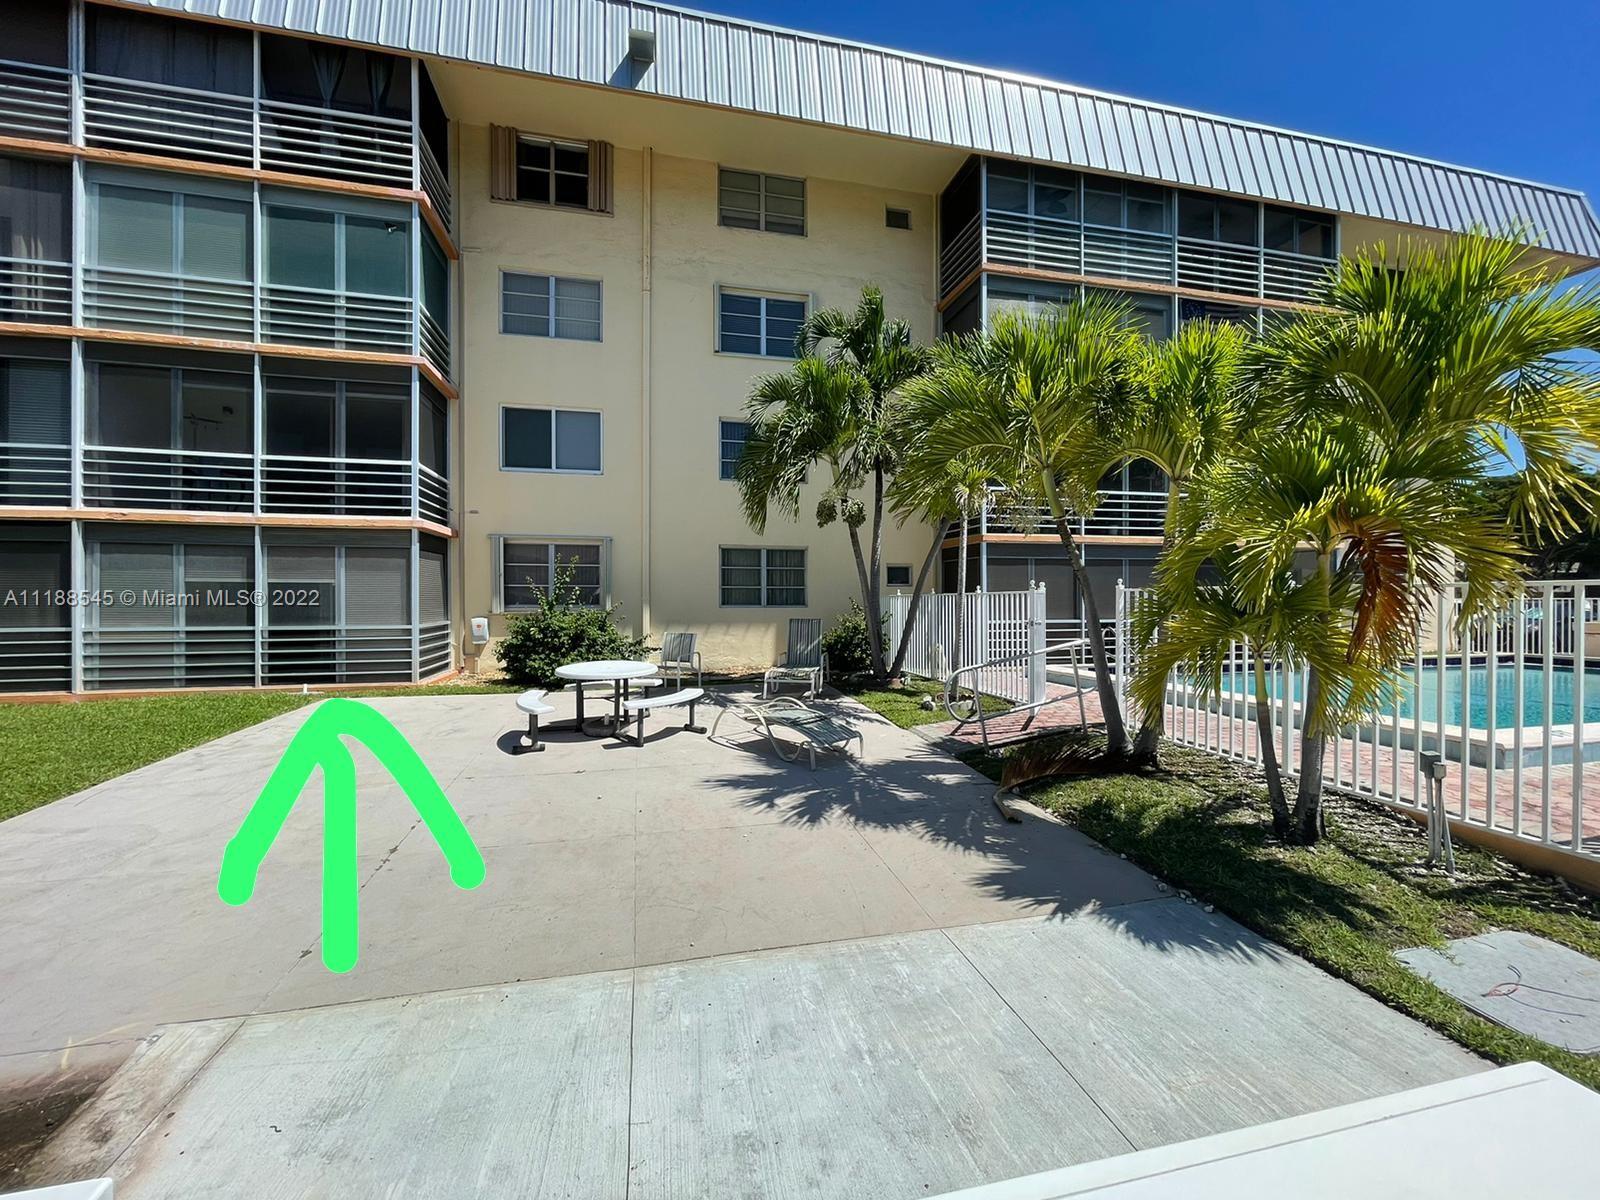 Location, the property is located within Eastern Shores Gated Community in North Miami Beach. The Location provide access to Sunny Isles and Aventura areas with an affordable price.  Closing must be after July 30th. Seller motivated.